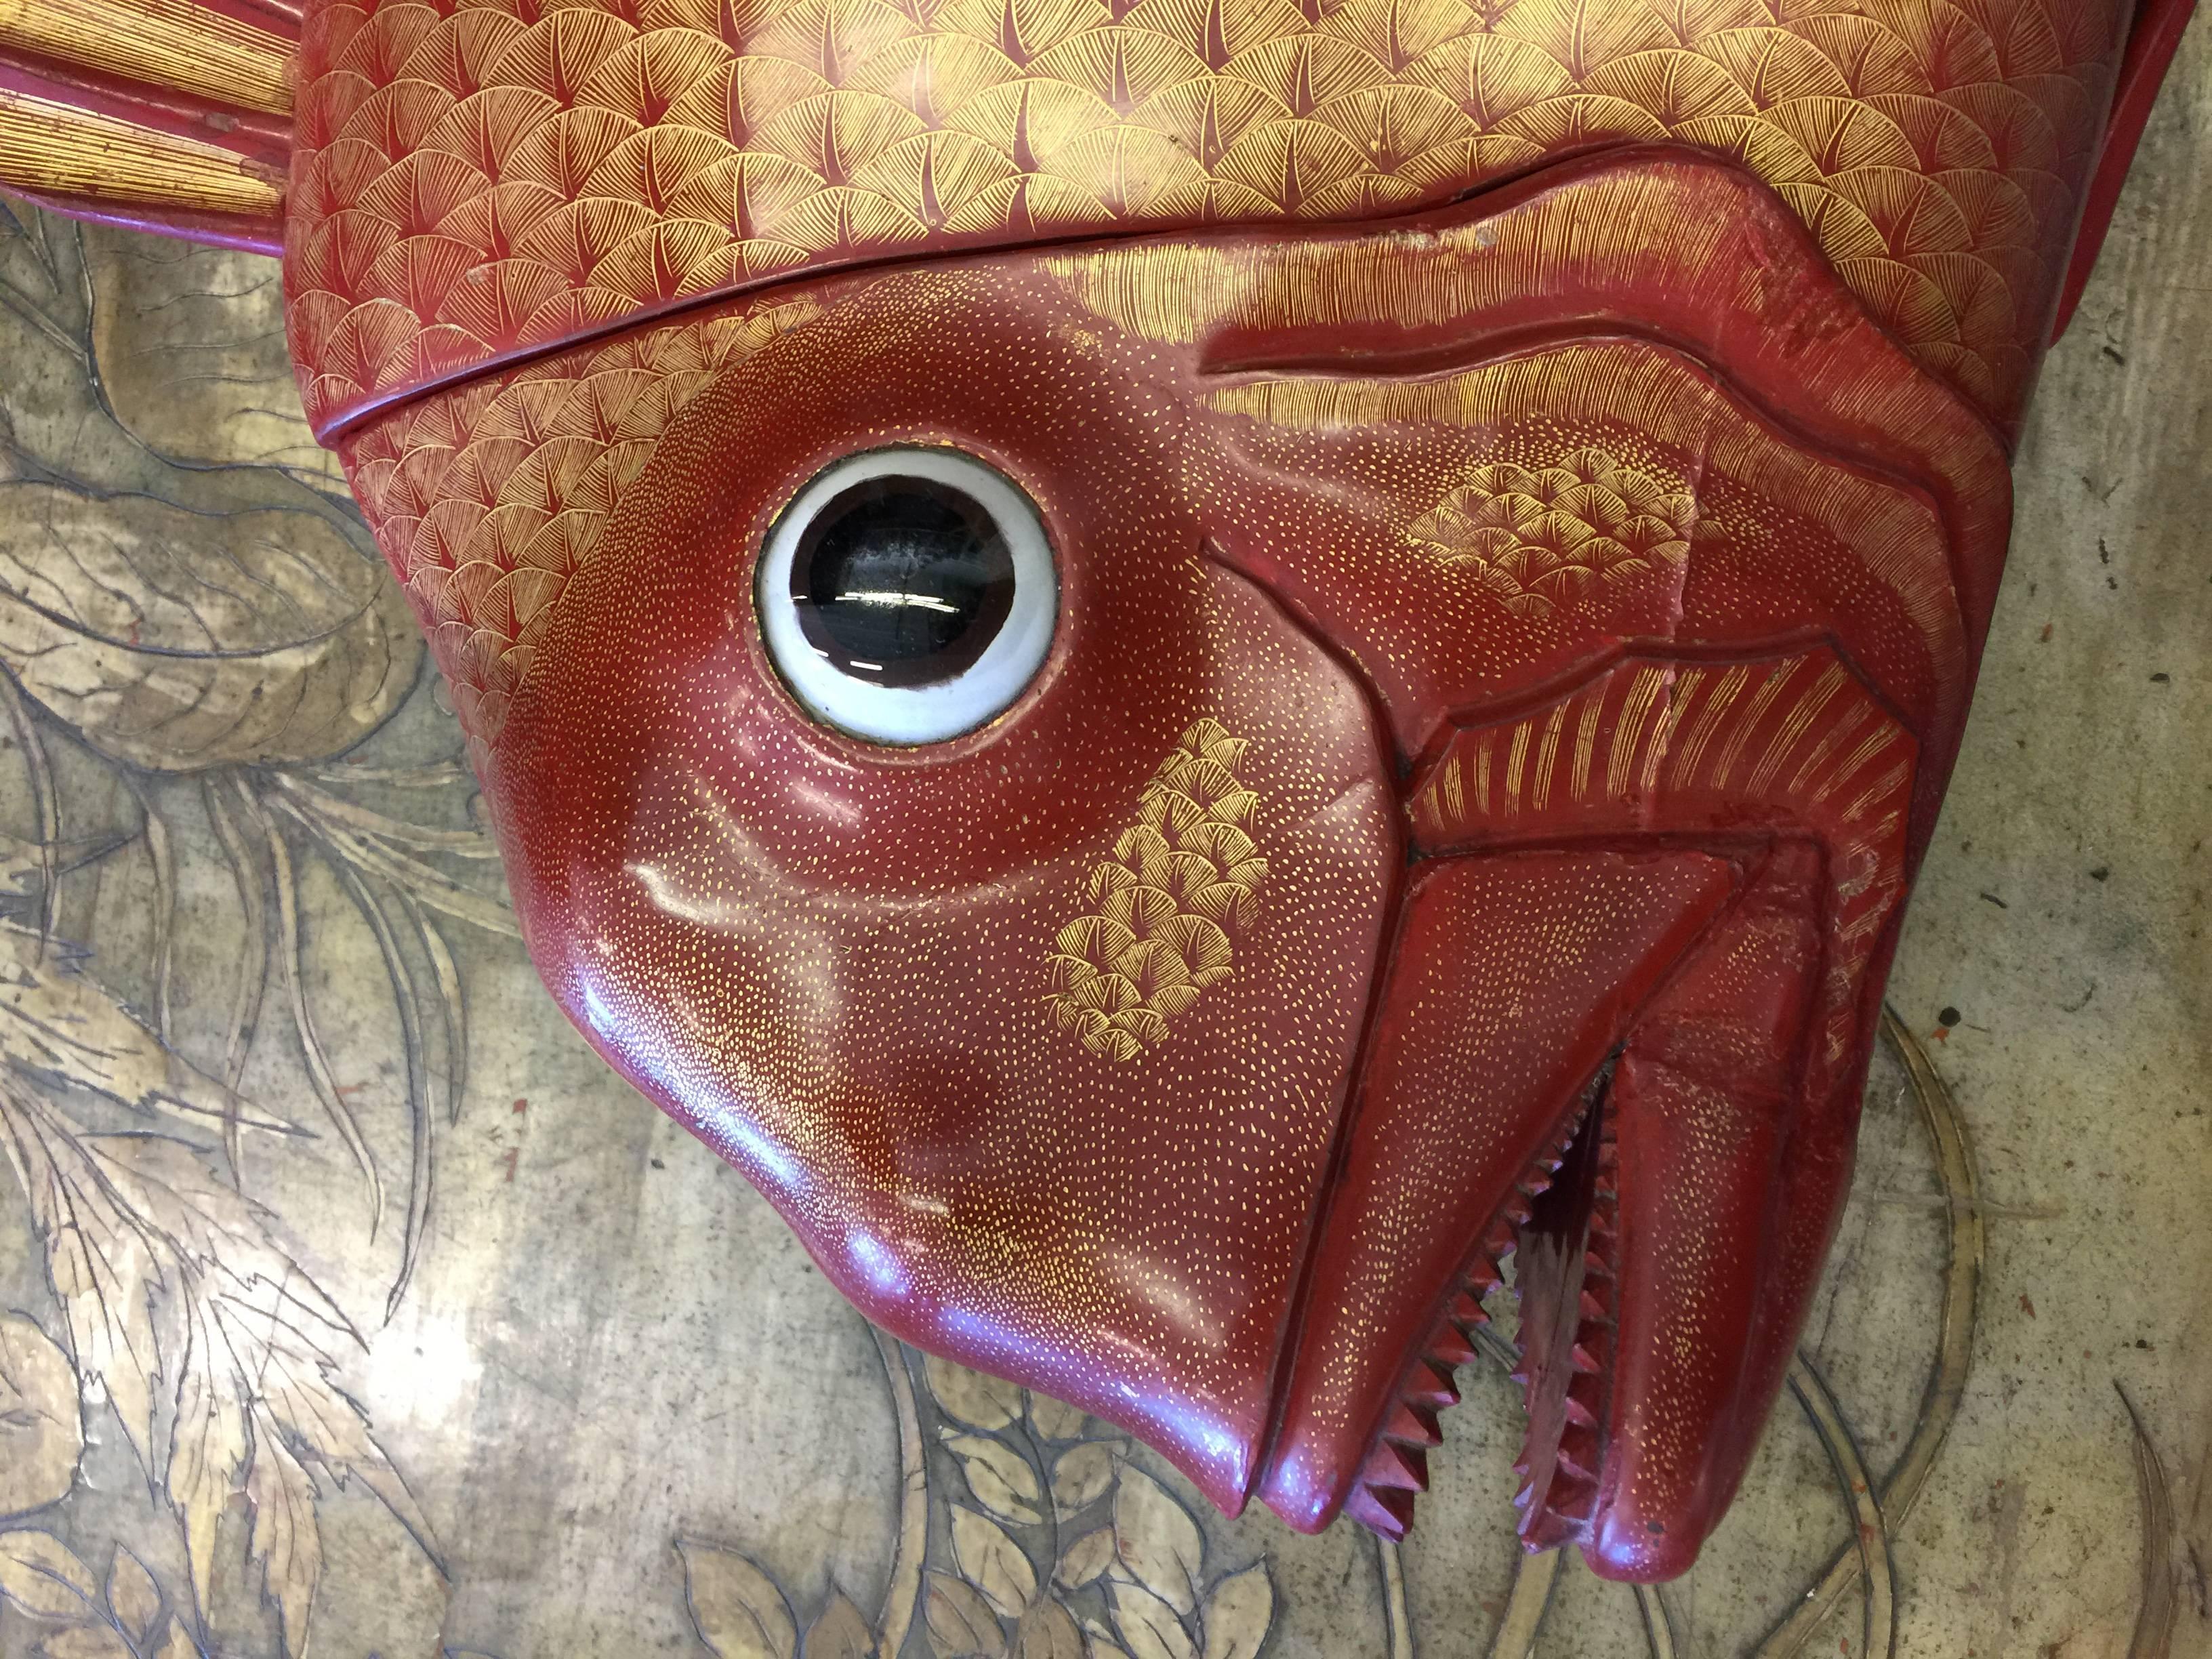 A wonderfully expressive massive red lacquer box, Japanese, in the shape of a fish. With line details in gold.